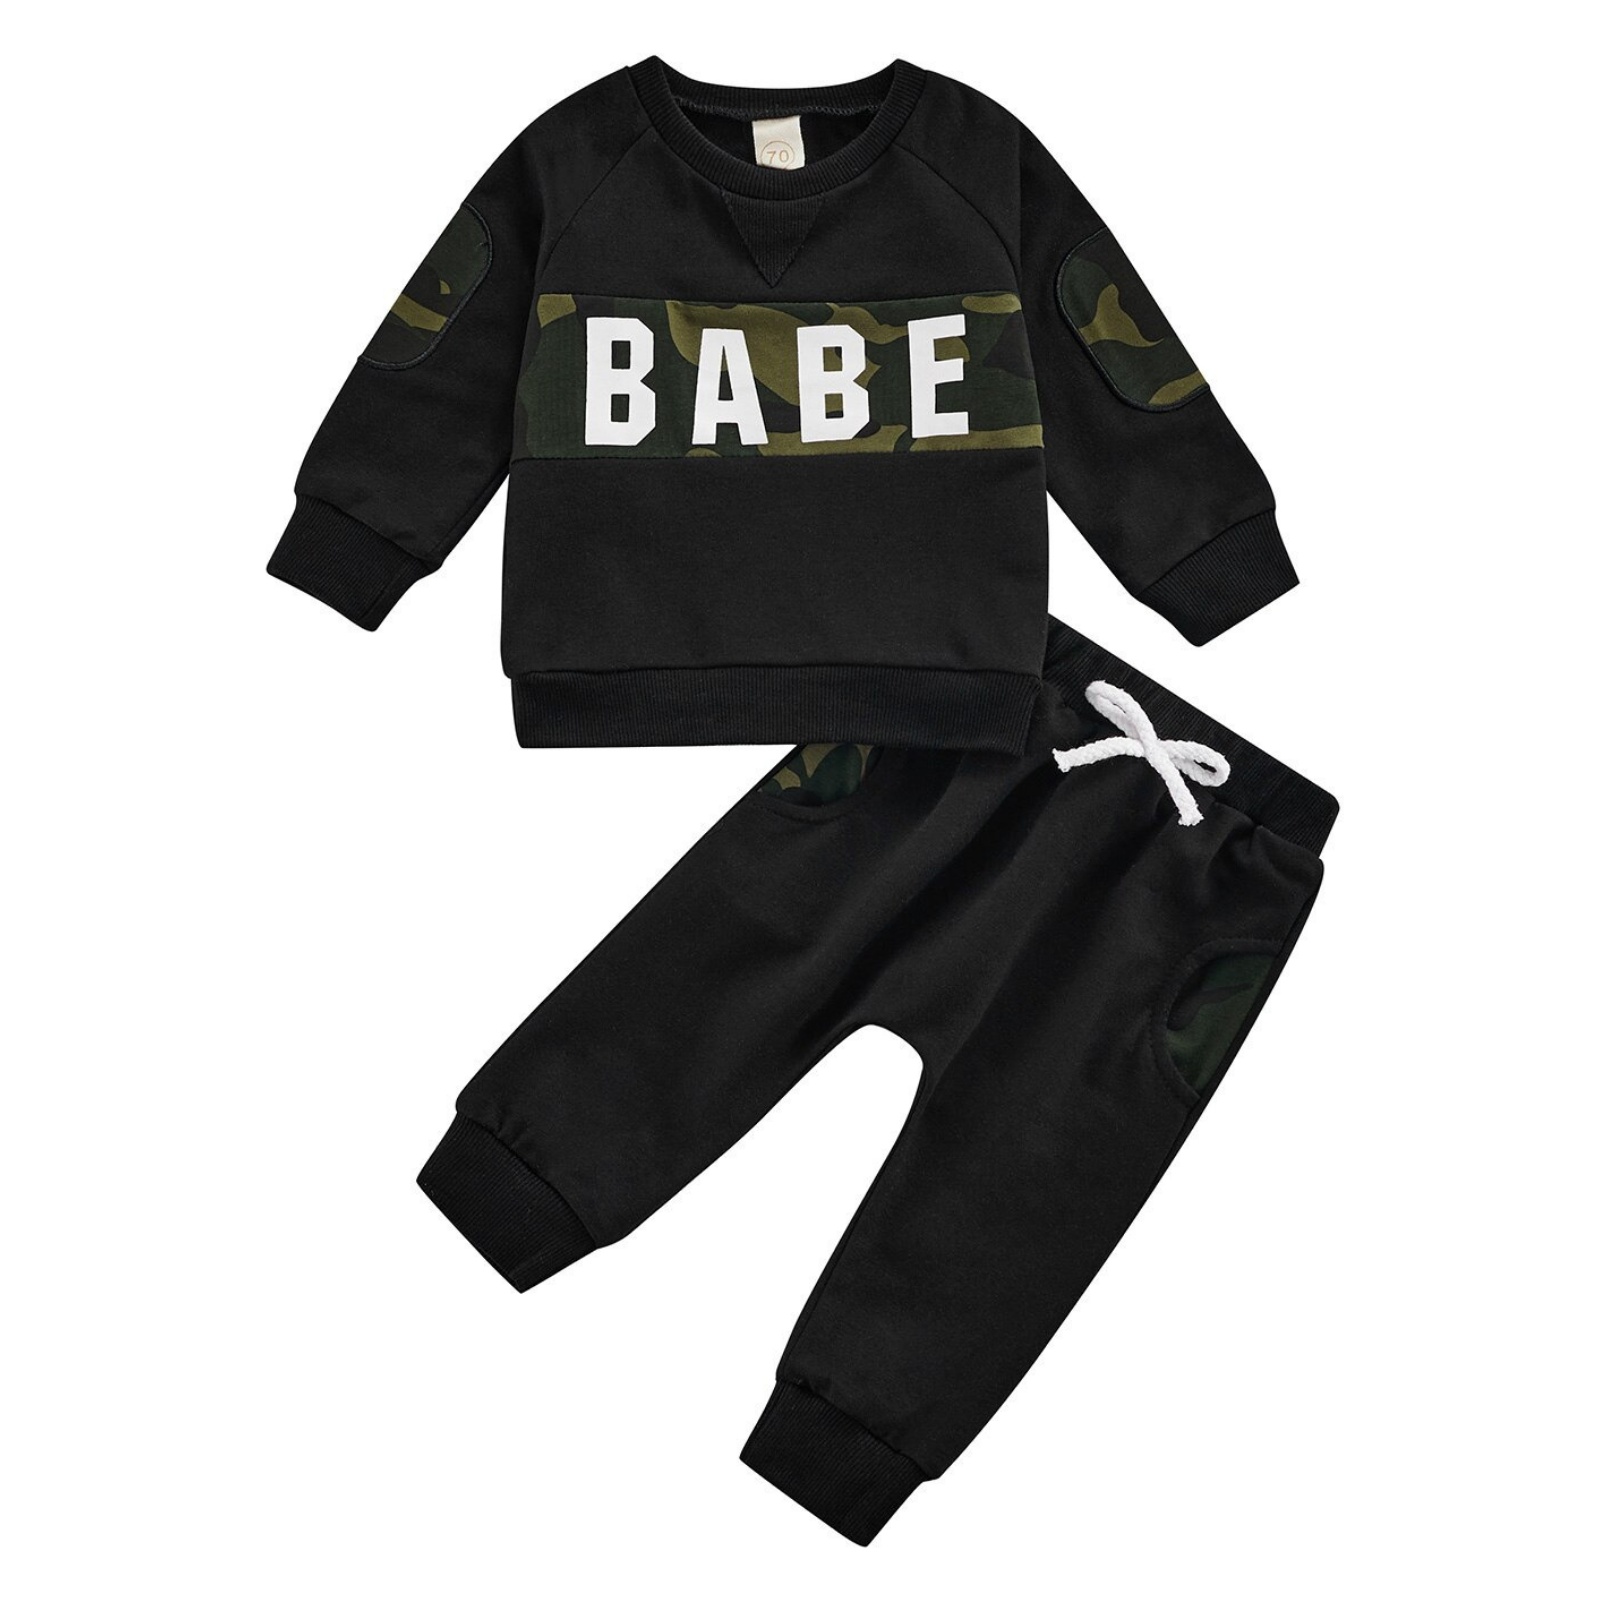 Babe Camo Patch Baby Clothing Set